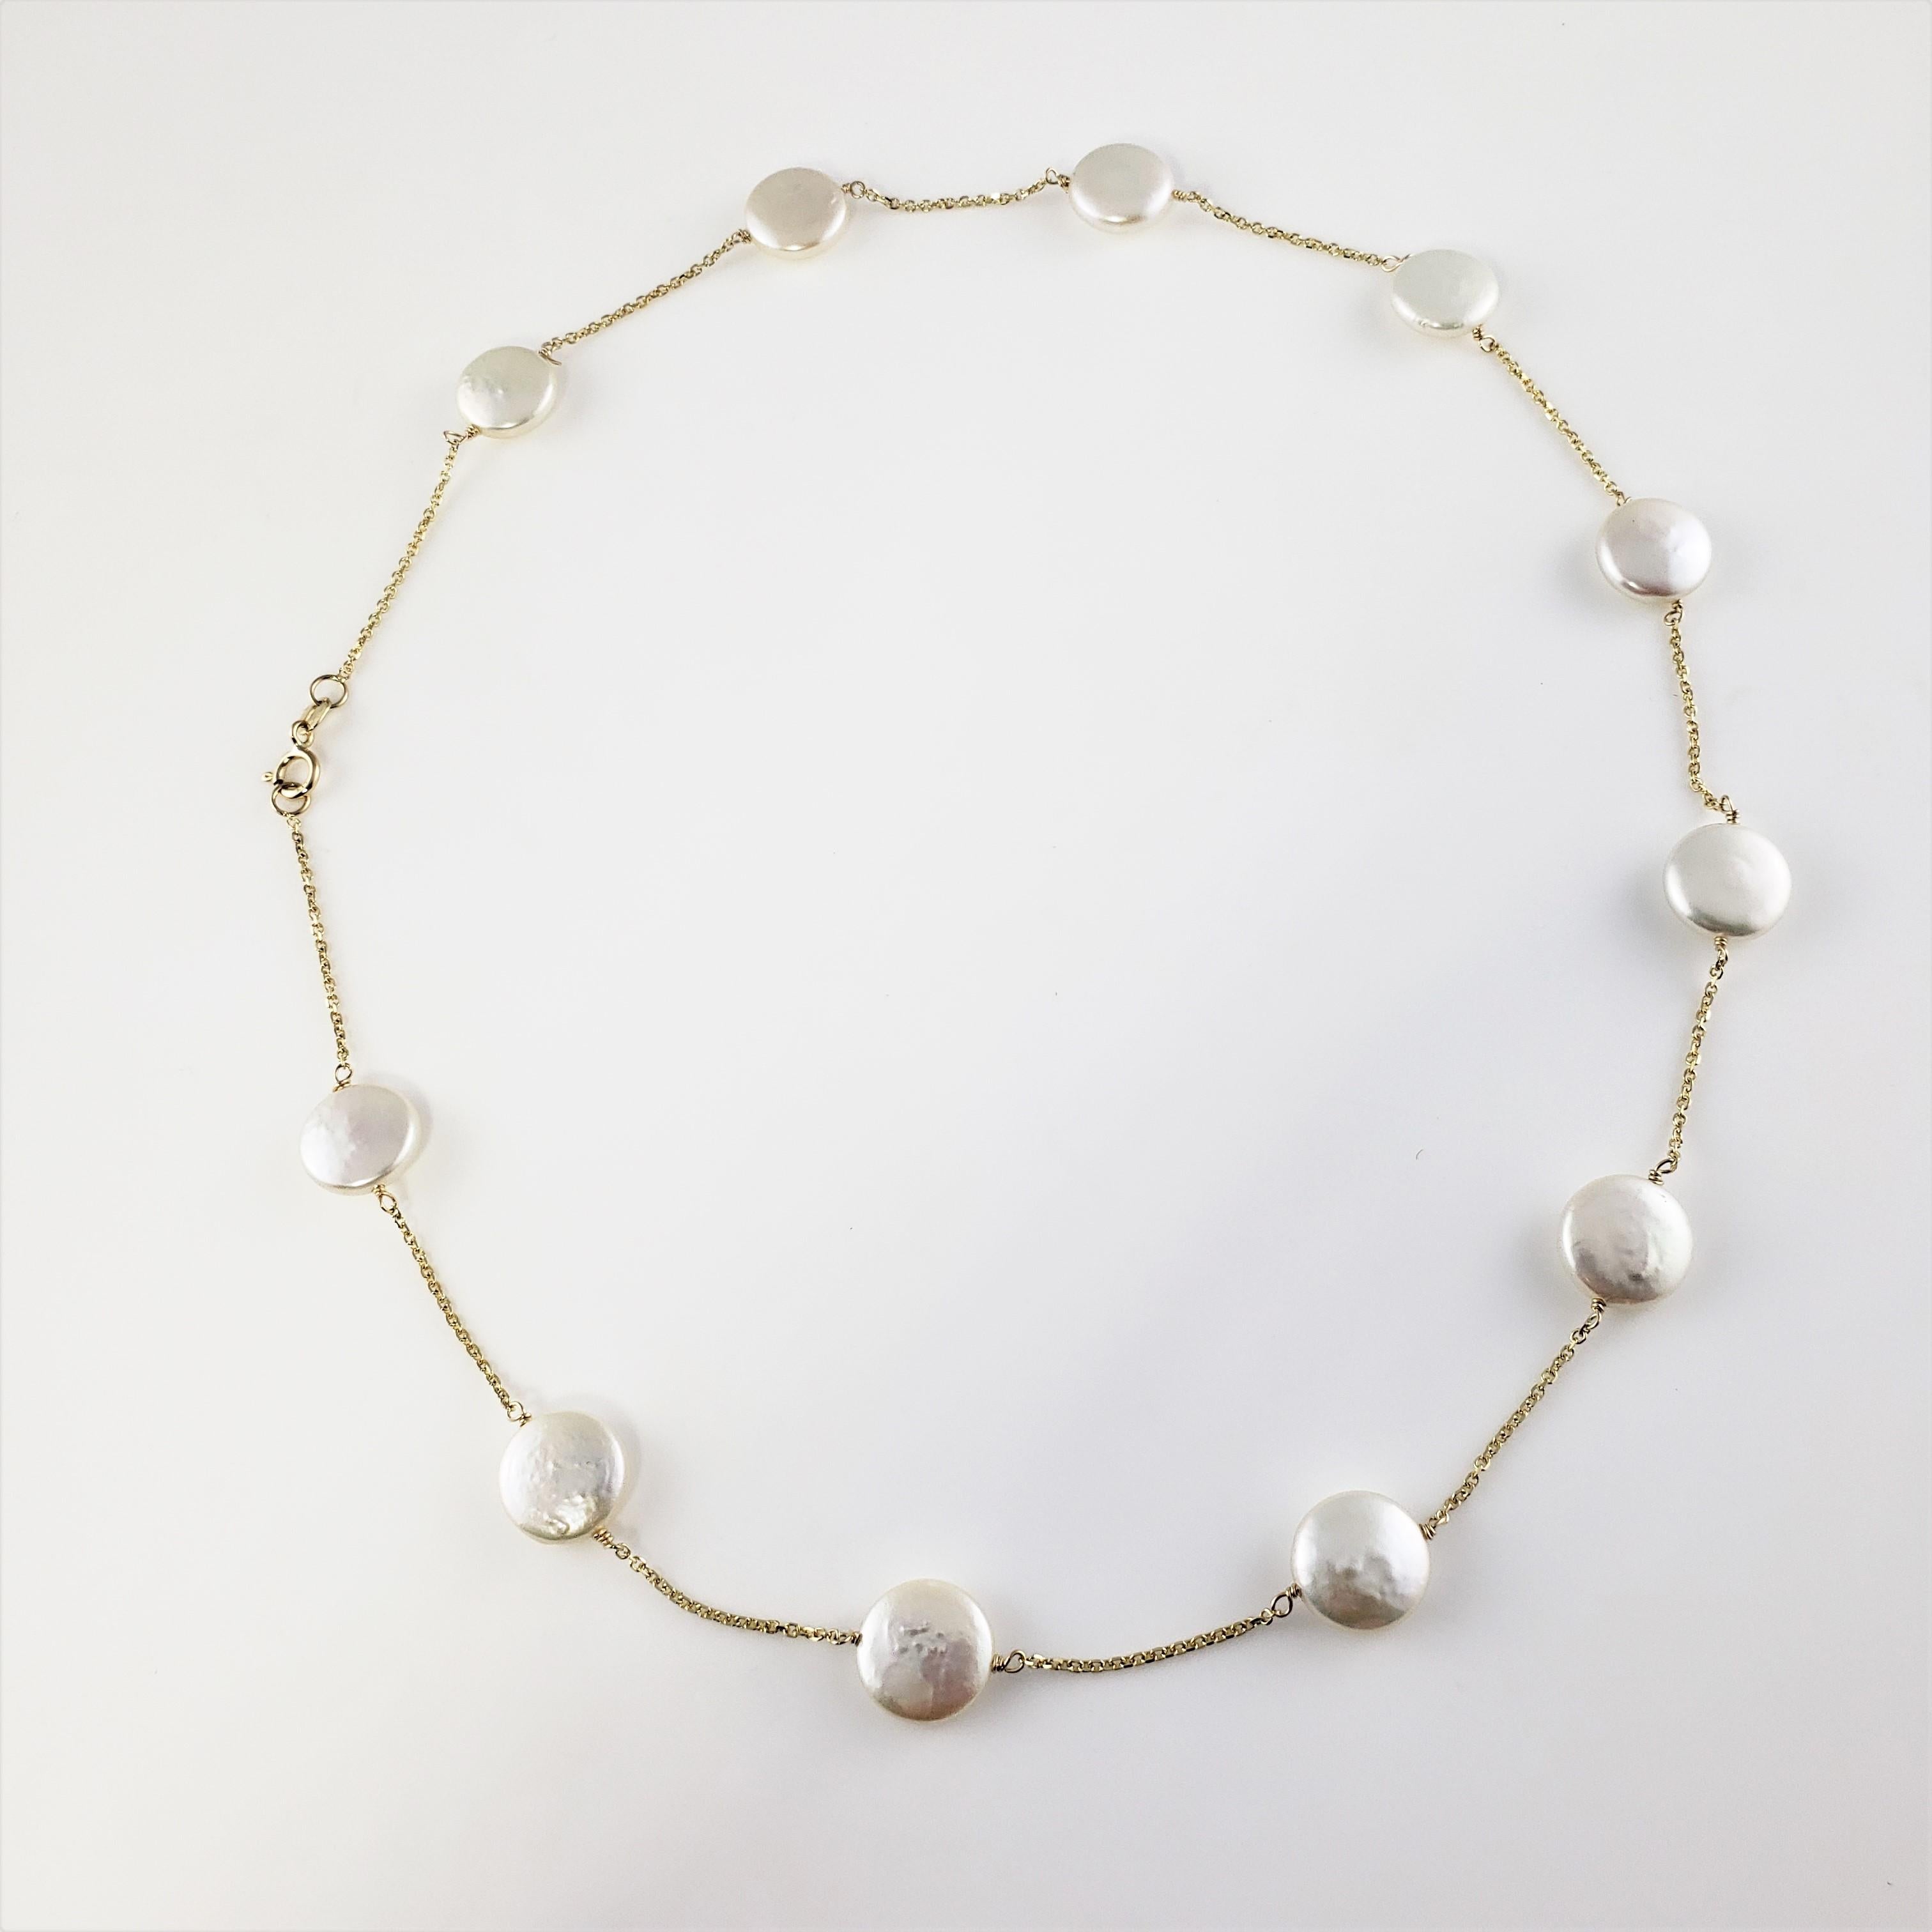 14 Karat Yellow Gold Coin Pearl Necklace-

This lovely necklace features 11 coin pearls (11 mm each) set on a classic 14K yellow gold chain.

Size:  17.5 inches 

Weight:  6.3 dwt. /  9.8 gr.

Stamped:  14K

Hallmark:  RCI

Very good condition,